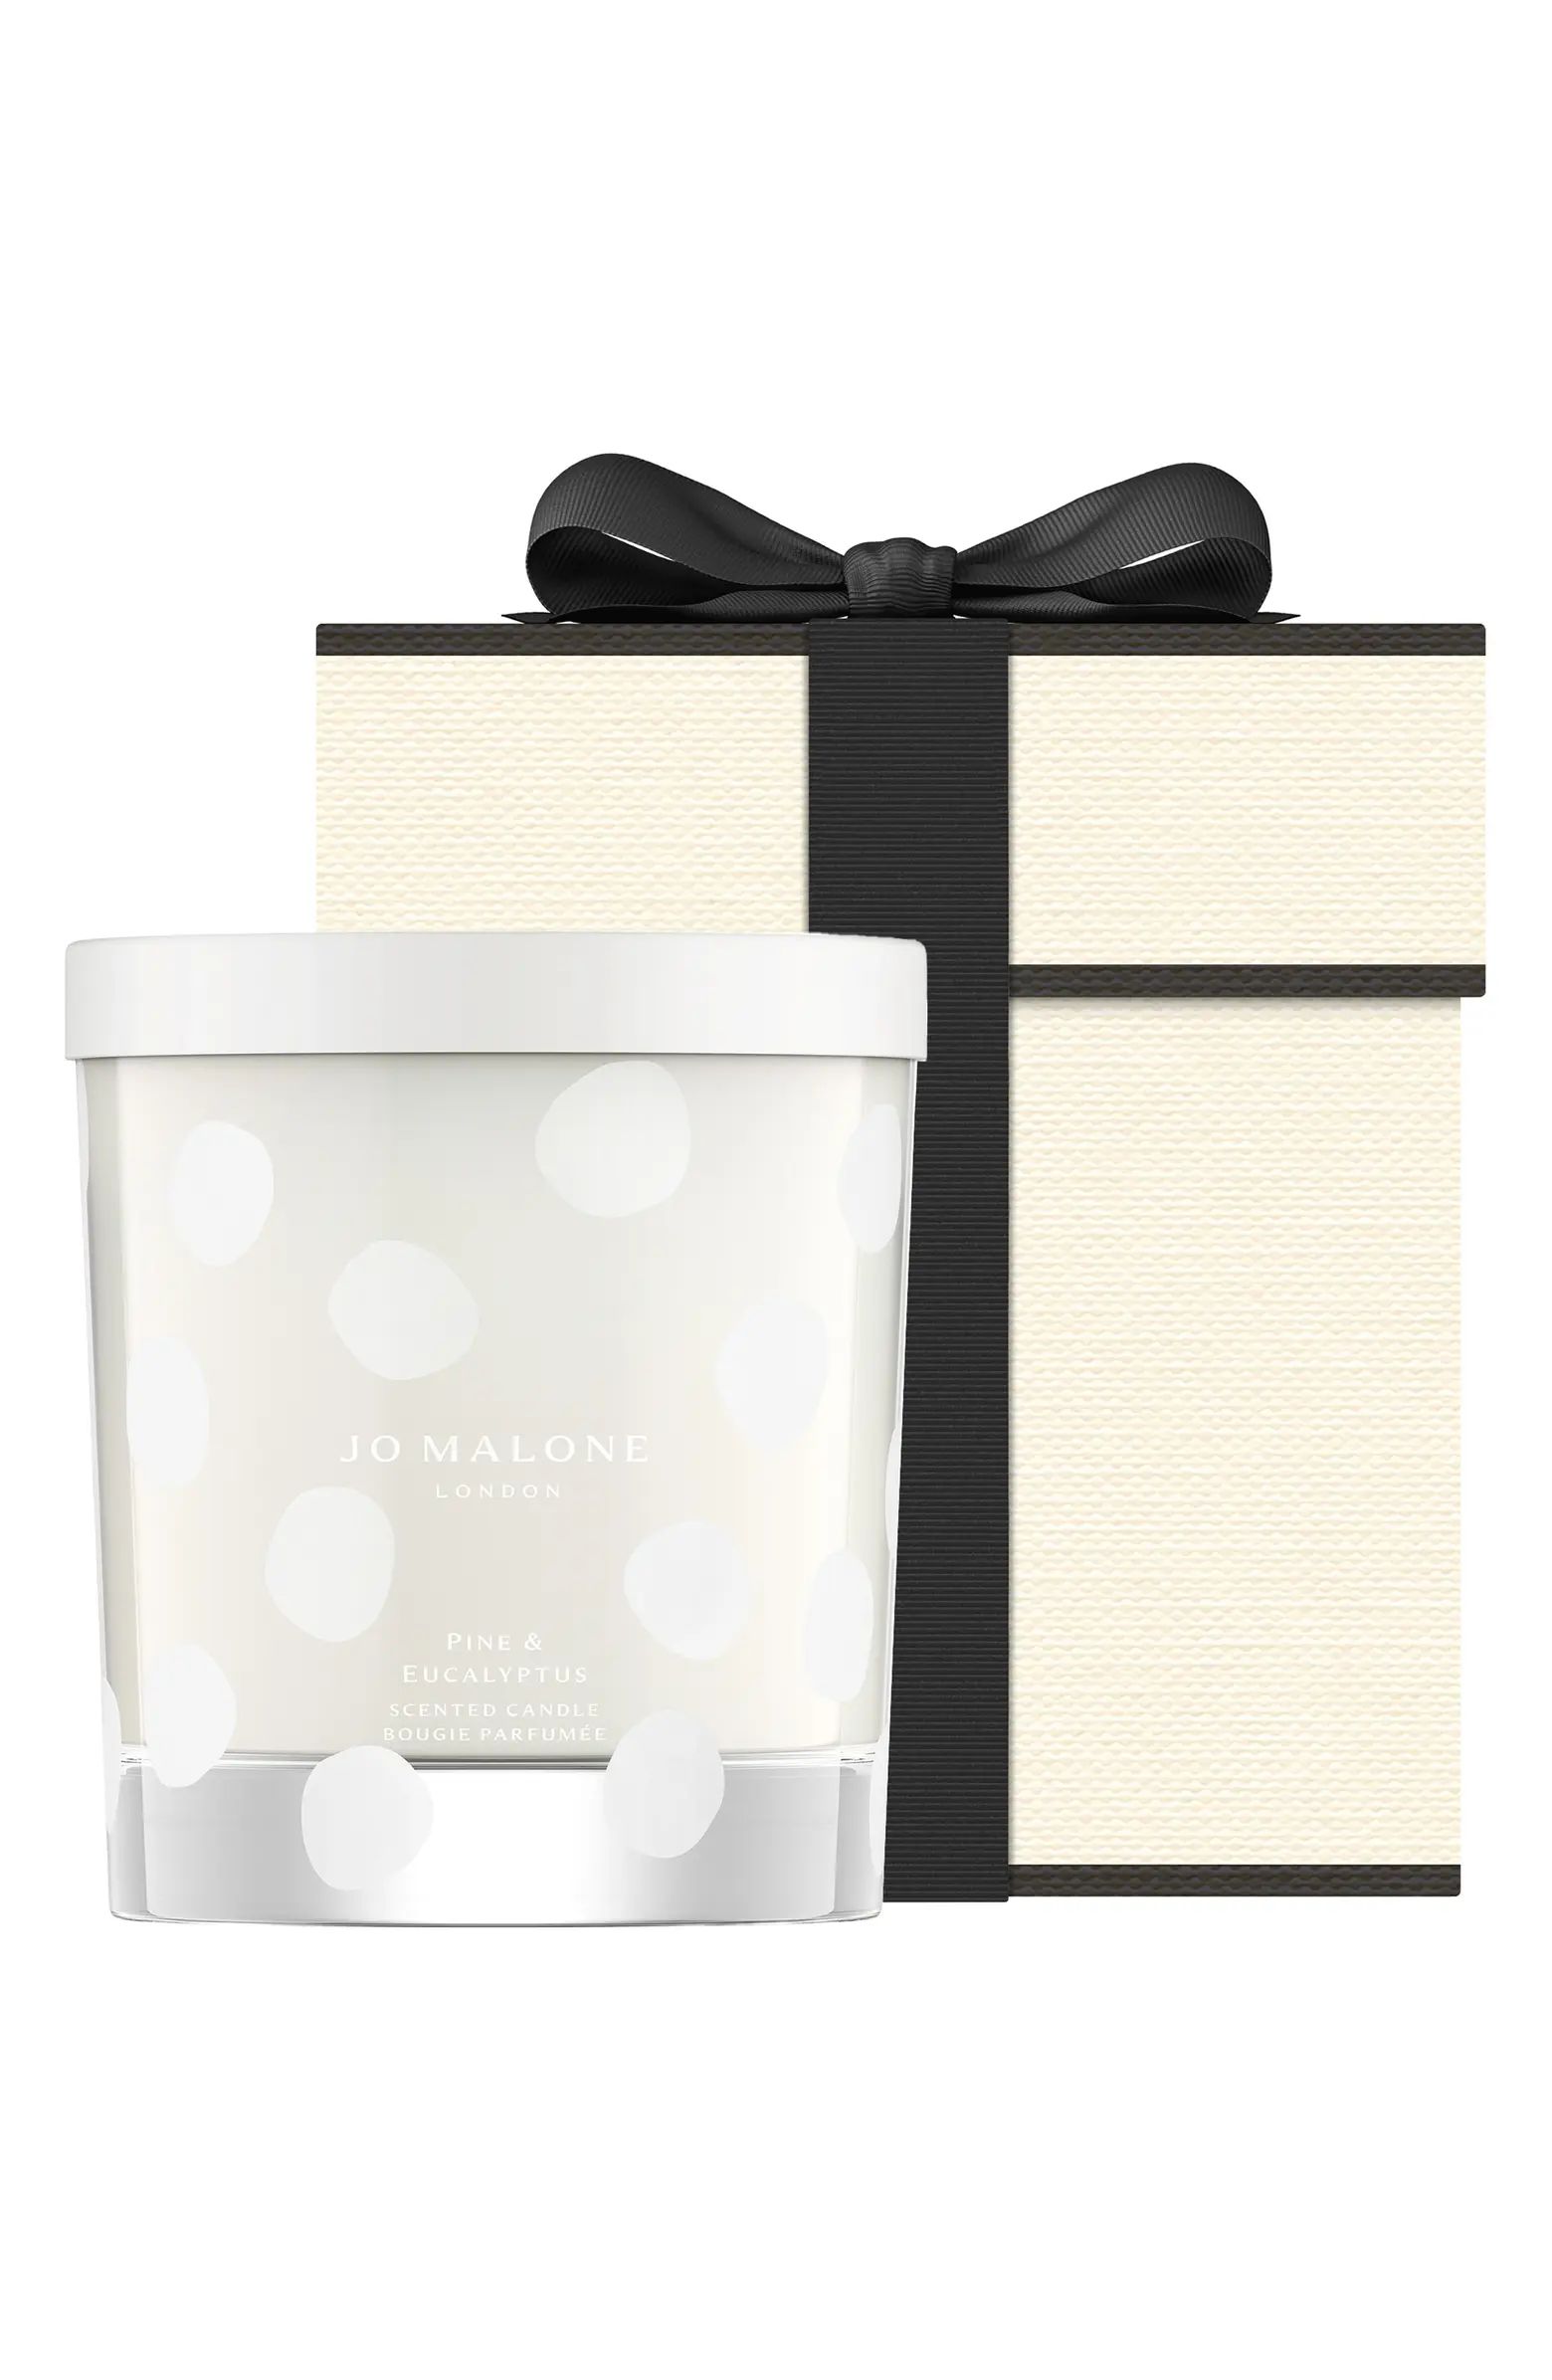 Pine & Eucalyptus Scented Candle | Nordstrom